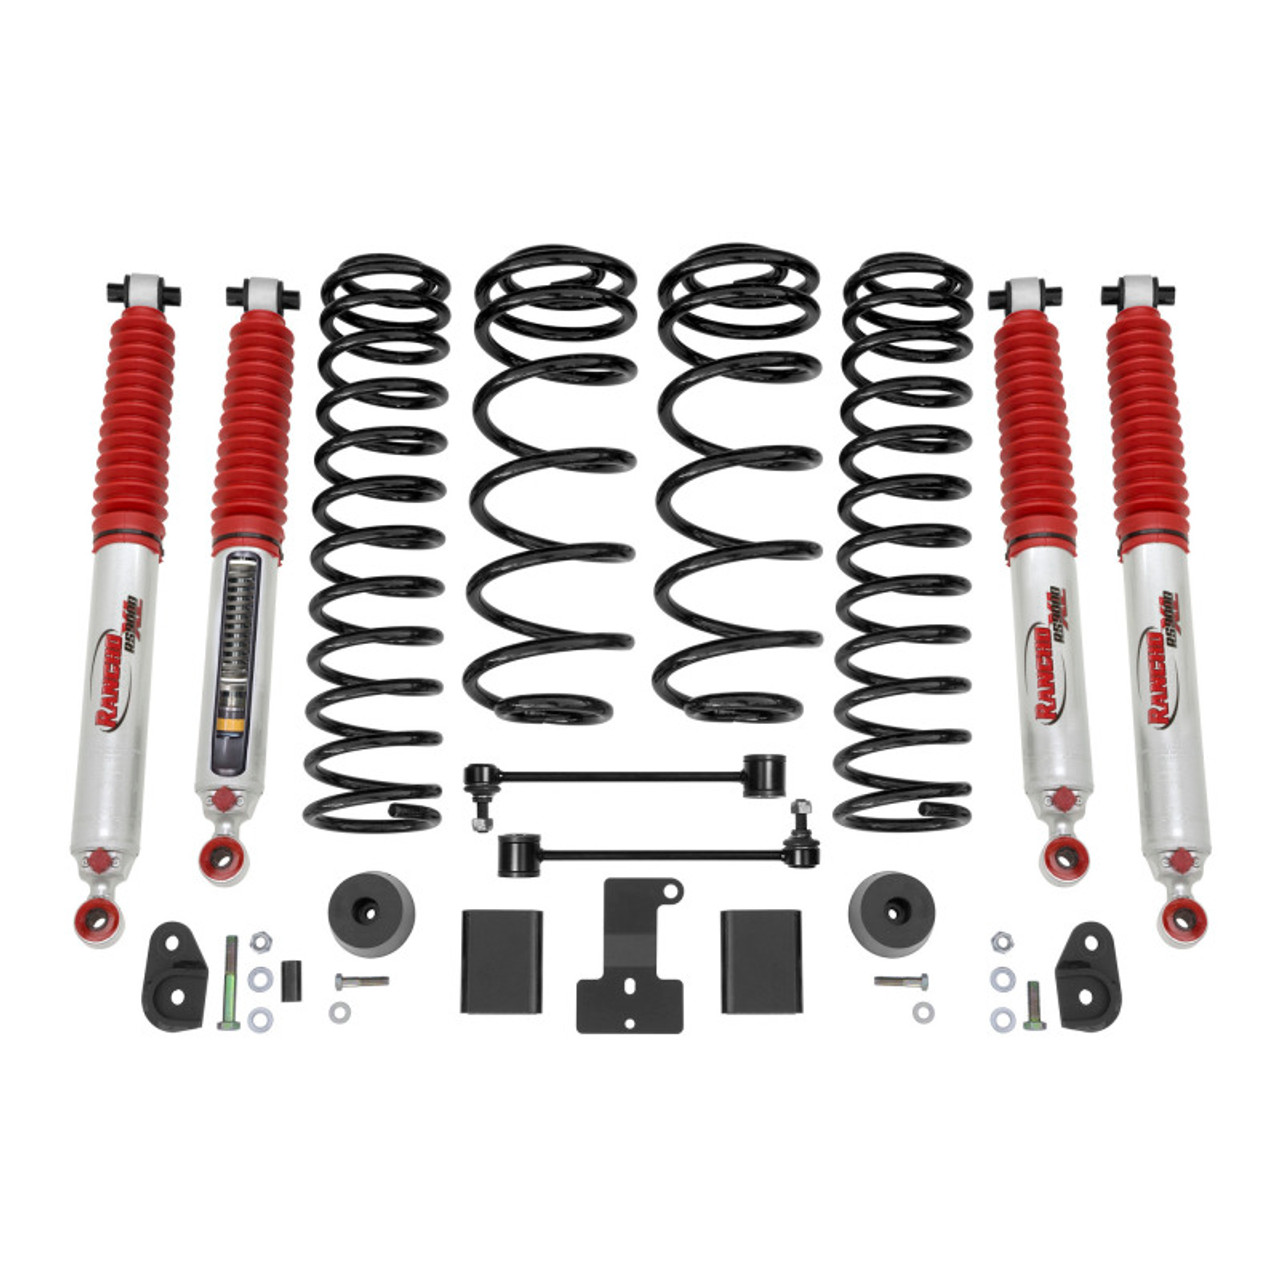 Rancho Suspension System - Master Part Number - Two Boxes - RS66124BR9 Photo - Primary